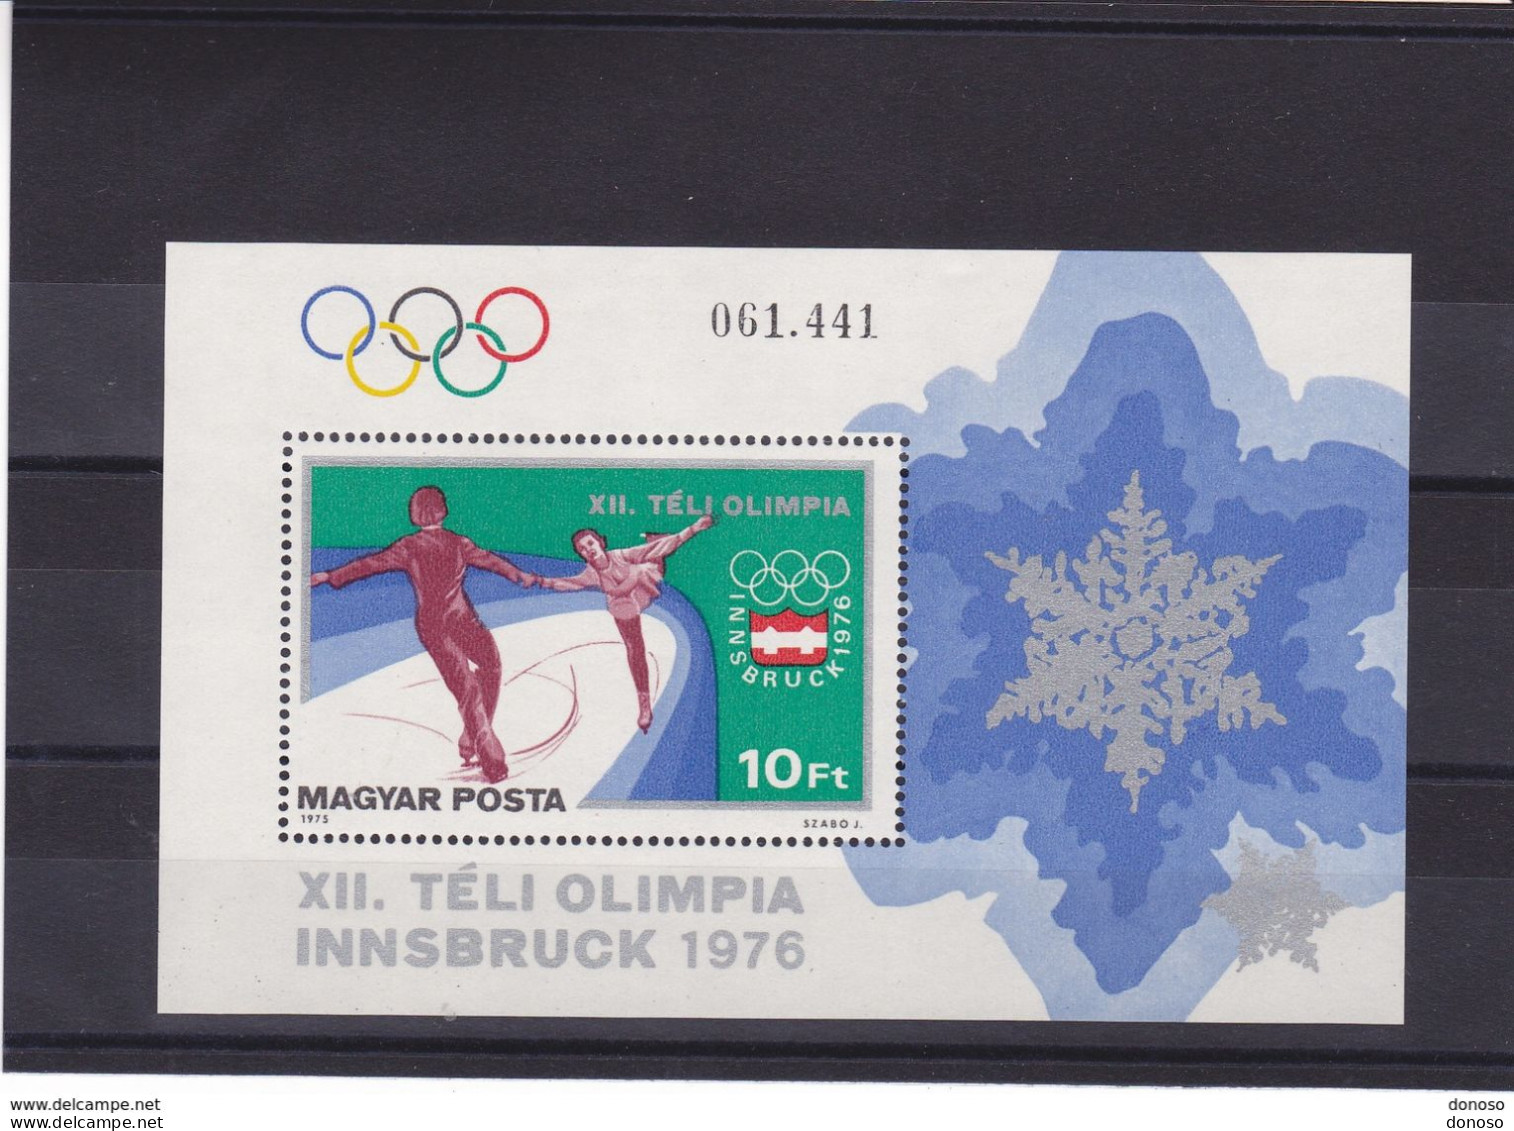 HONGRIE 1975 JEUX OLYMPIQUES INNSBRUCK  PATINAGE Yvert BF 122, Michel Bl 116 NEUF** MNH Cote Yv 6 Euros - Hojas Bloque